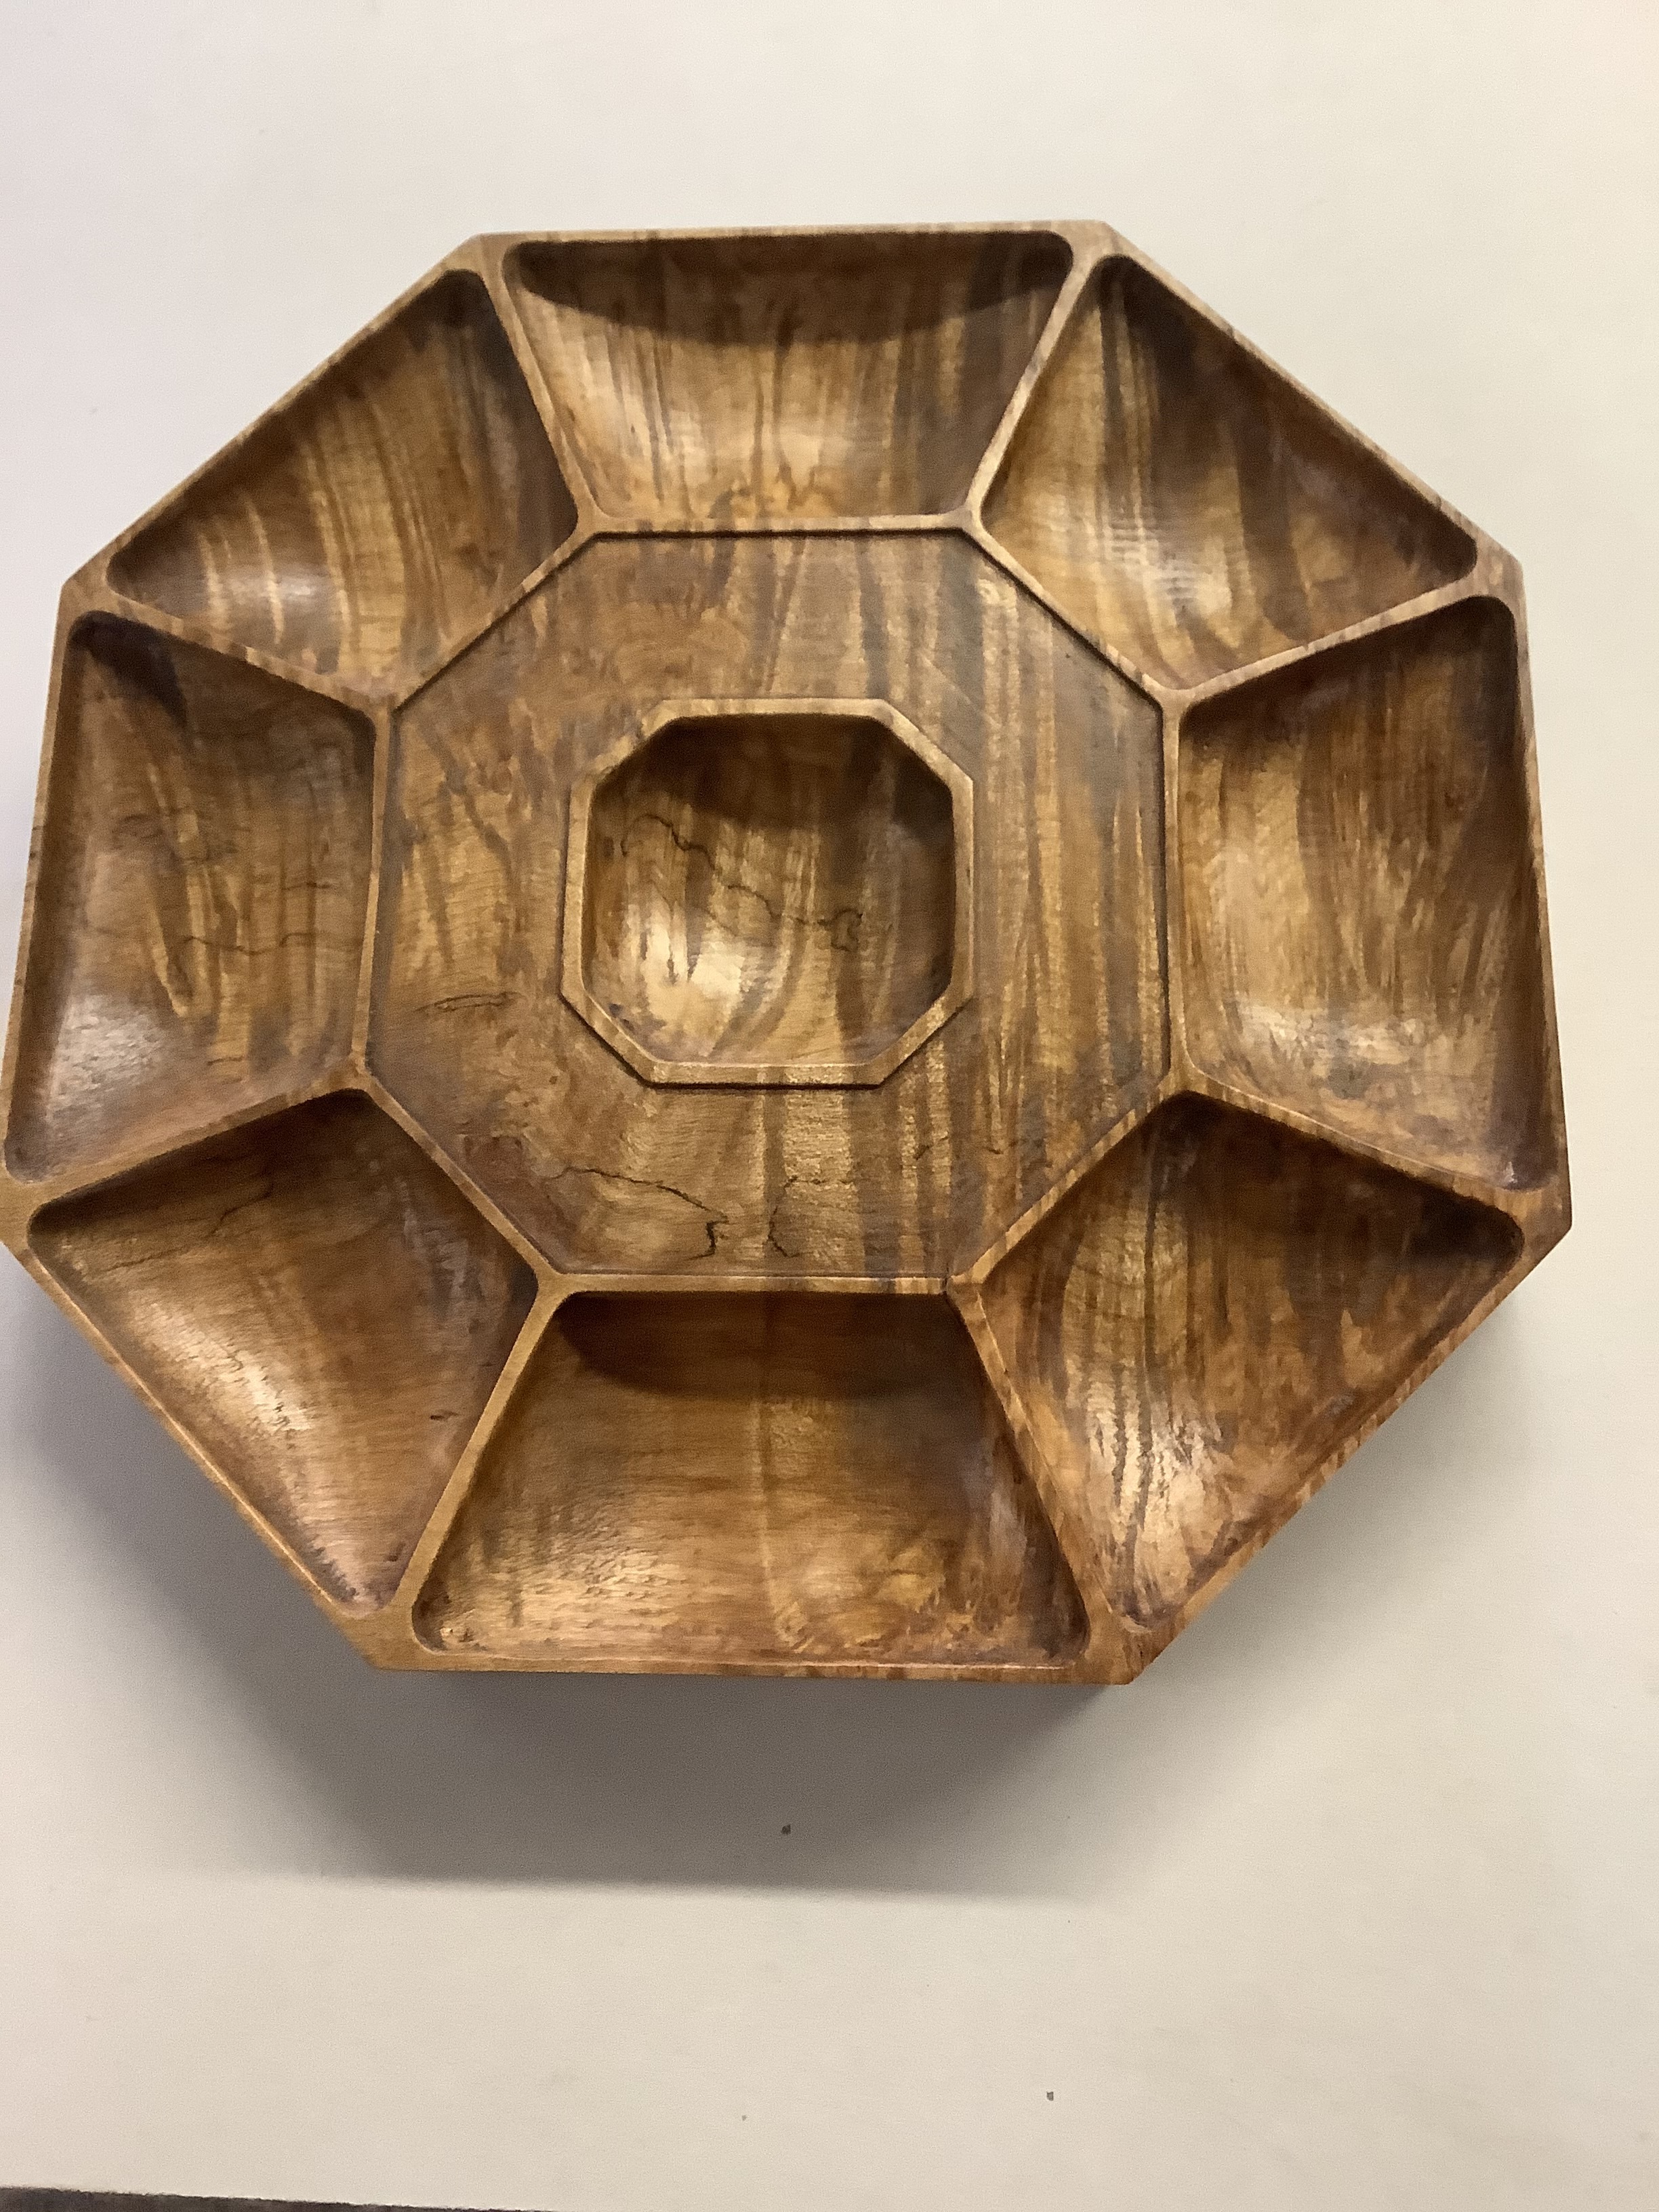 Wood carved with a CNC router